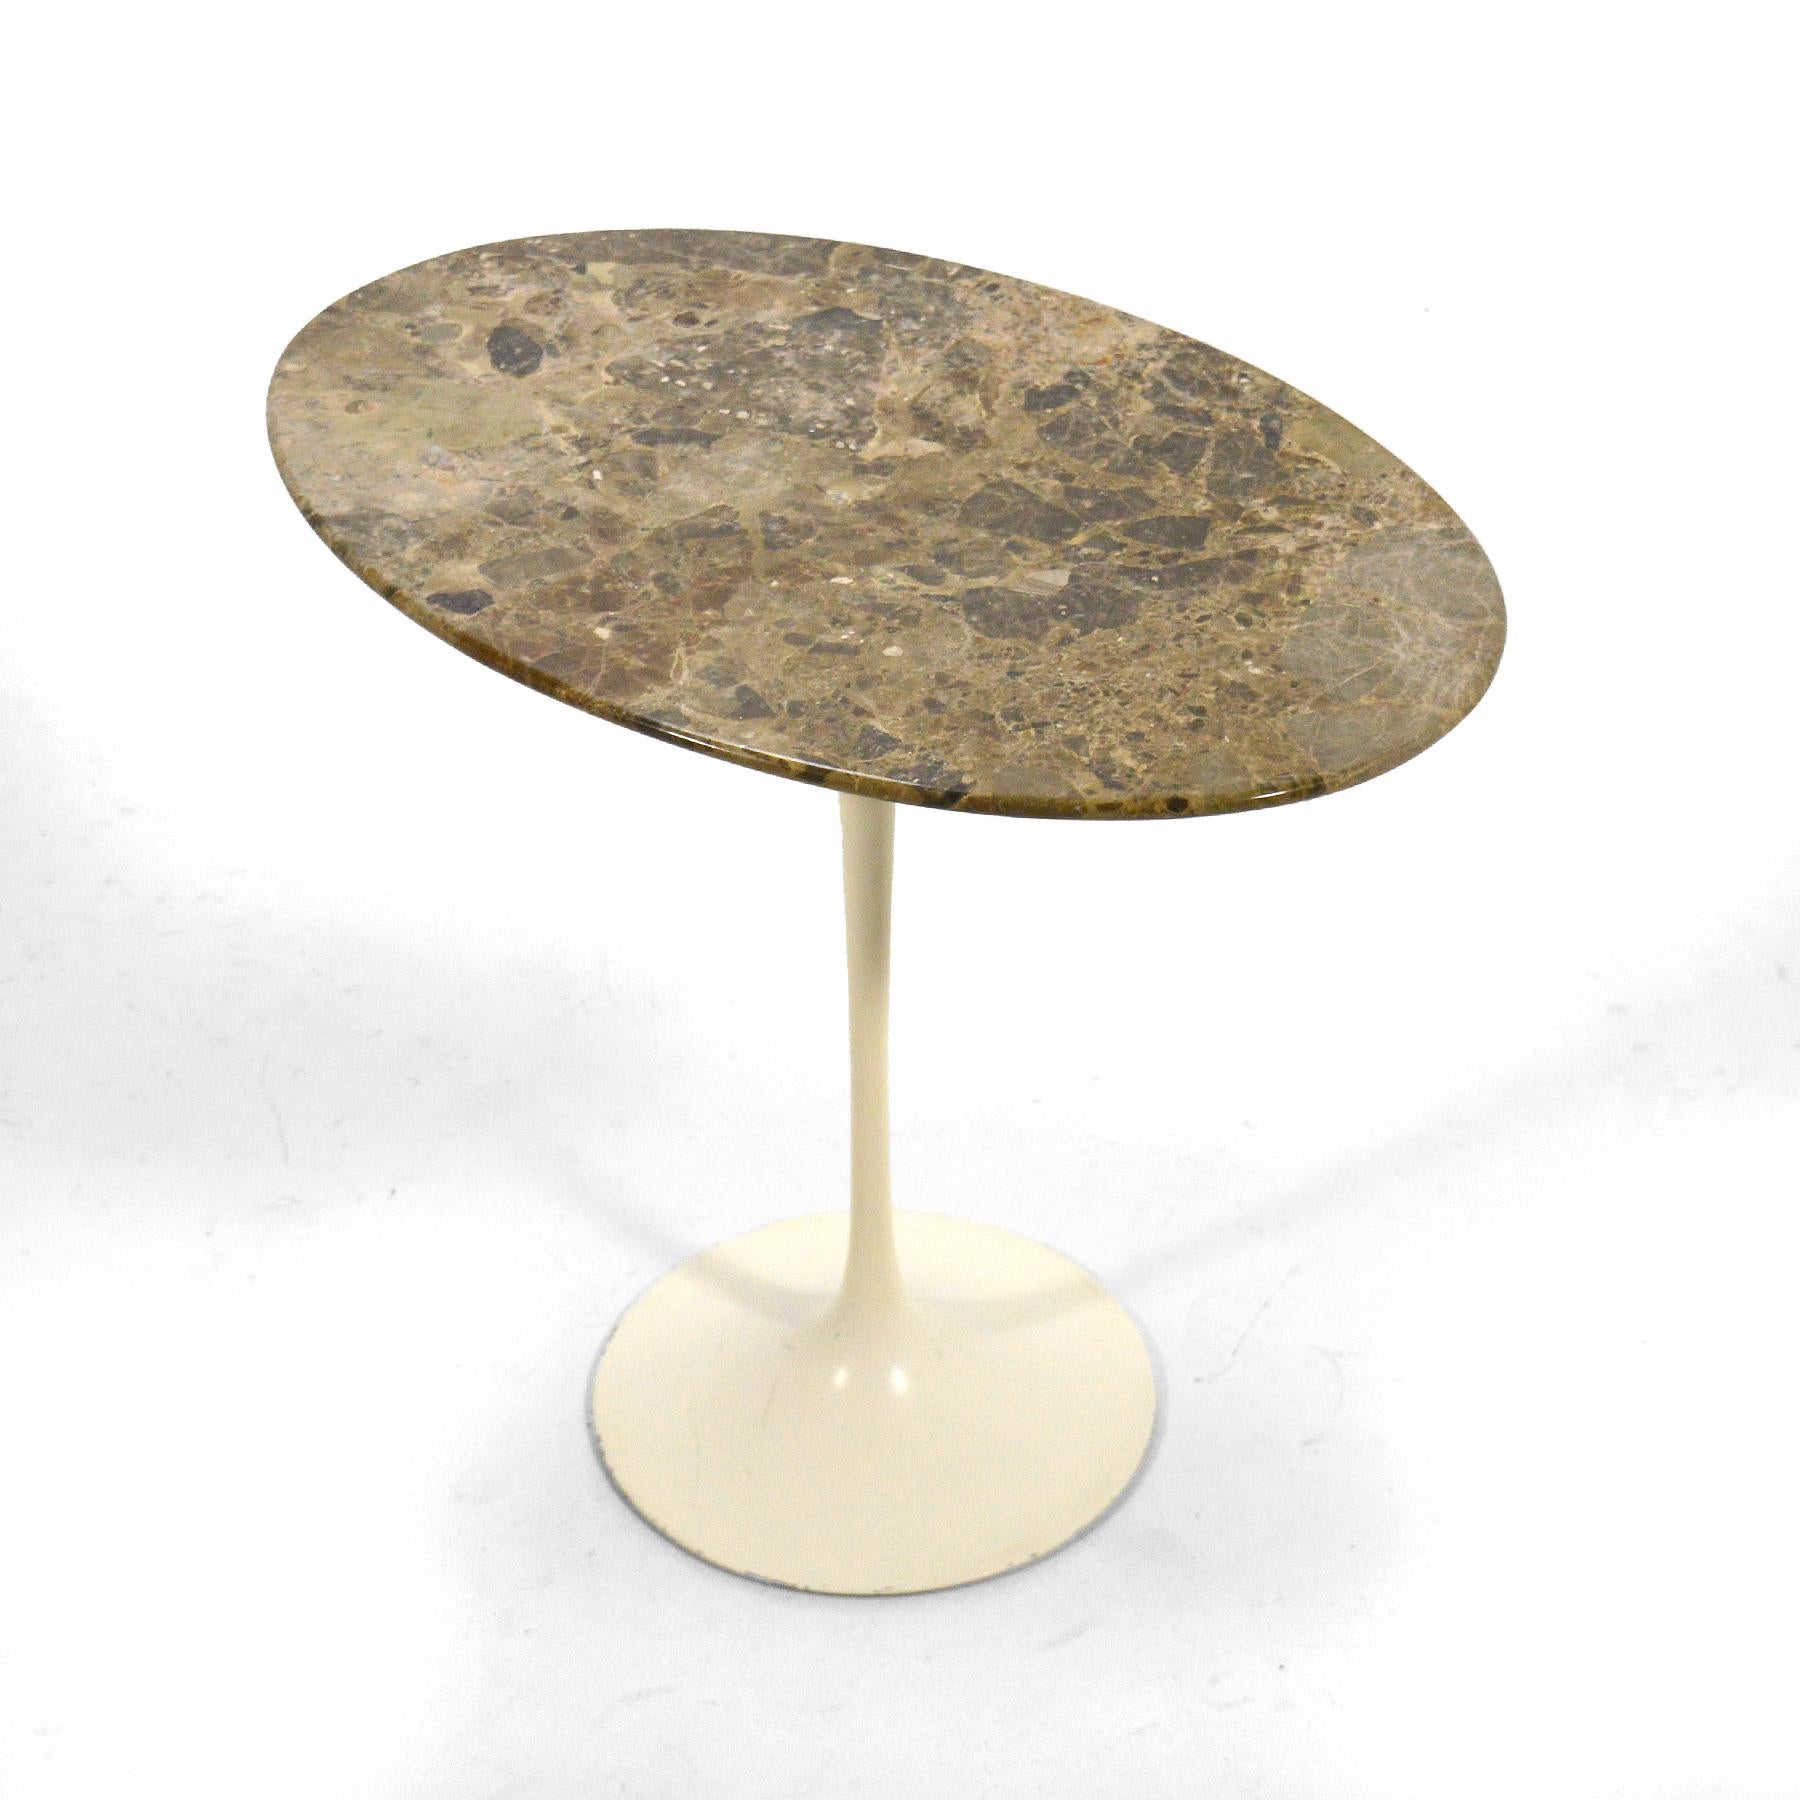 This rare early Saarinen Tulip side table by Knoll has an elliptical top of stunning stone which has a color and pattern that reminds us of a lunar landscape. This exceptional example has the perfect patina from age.